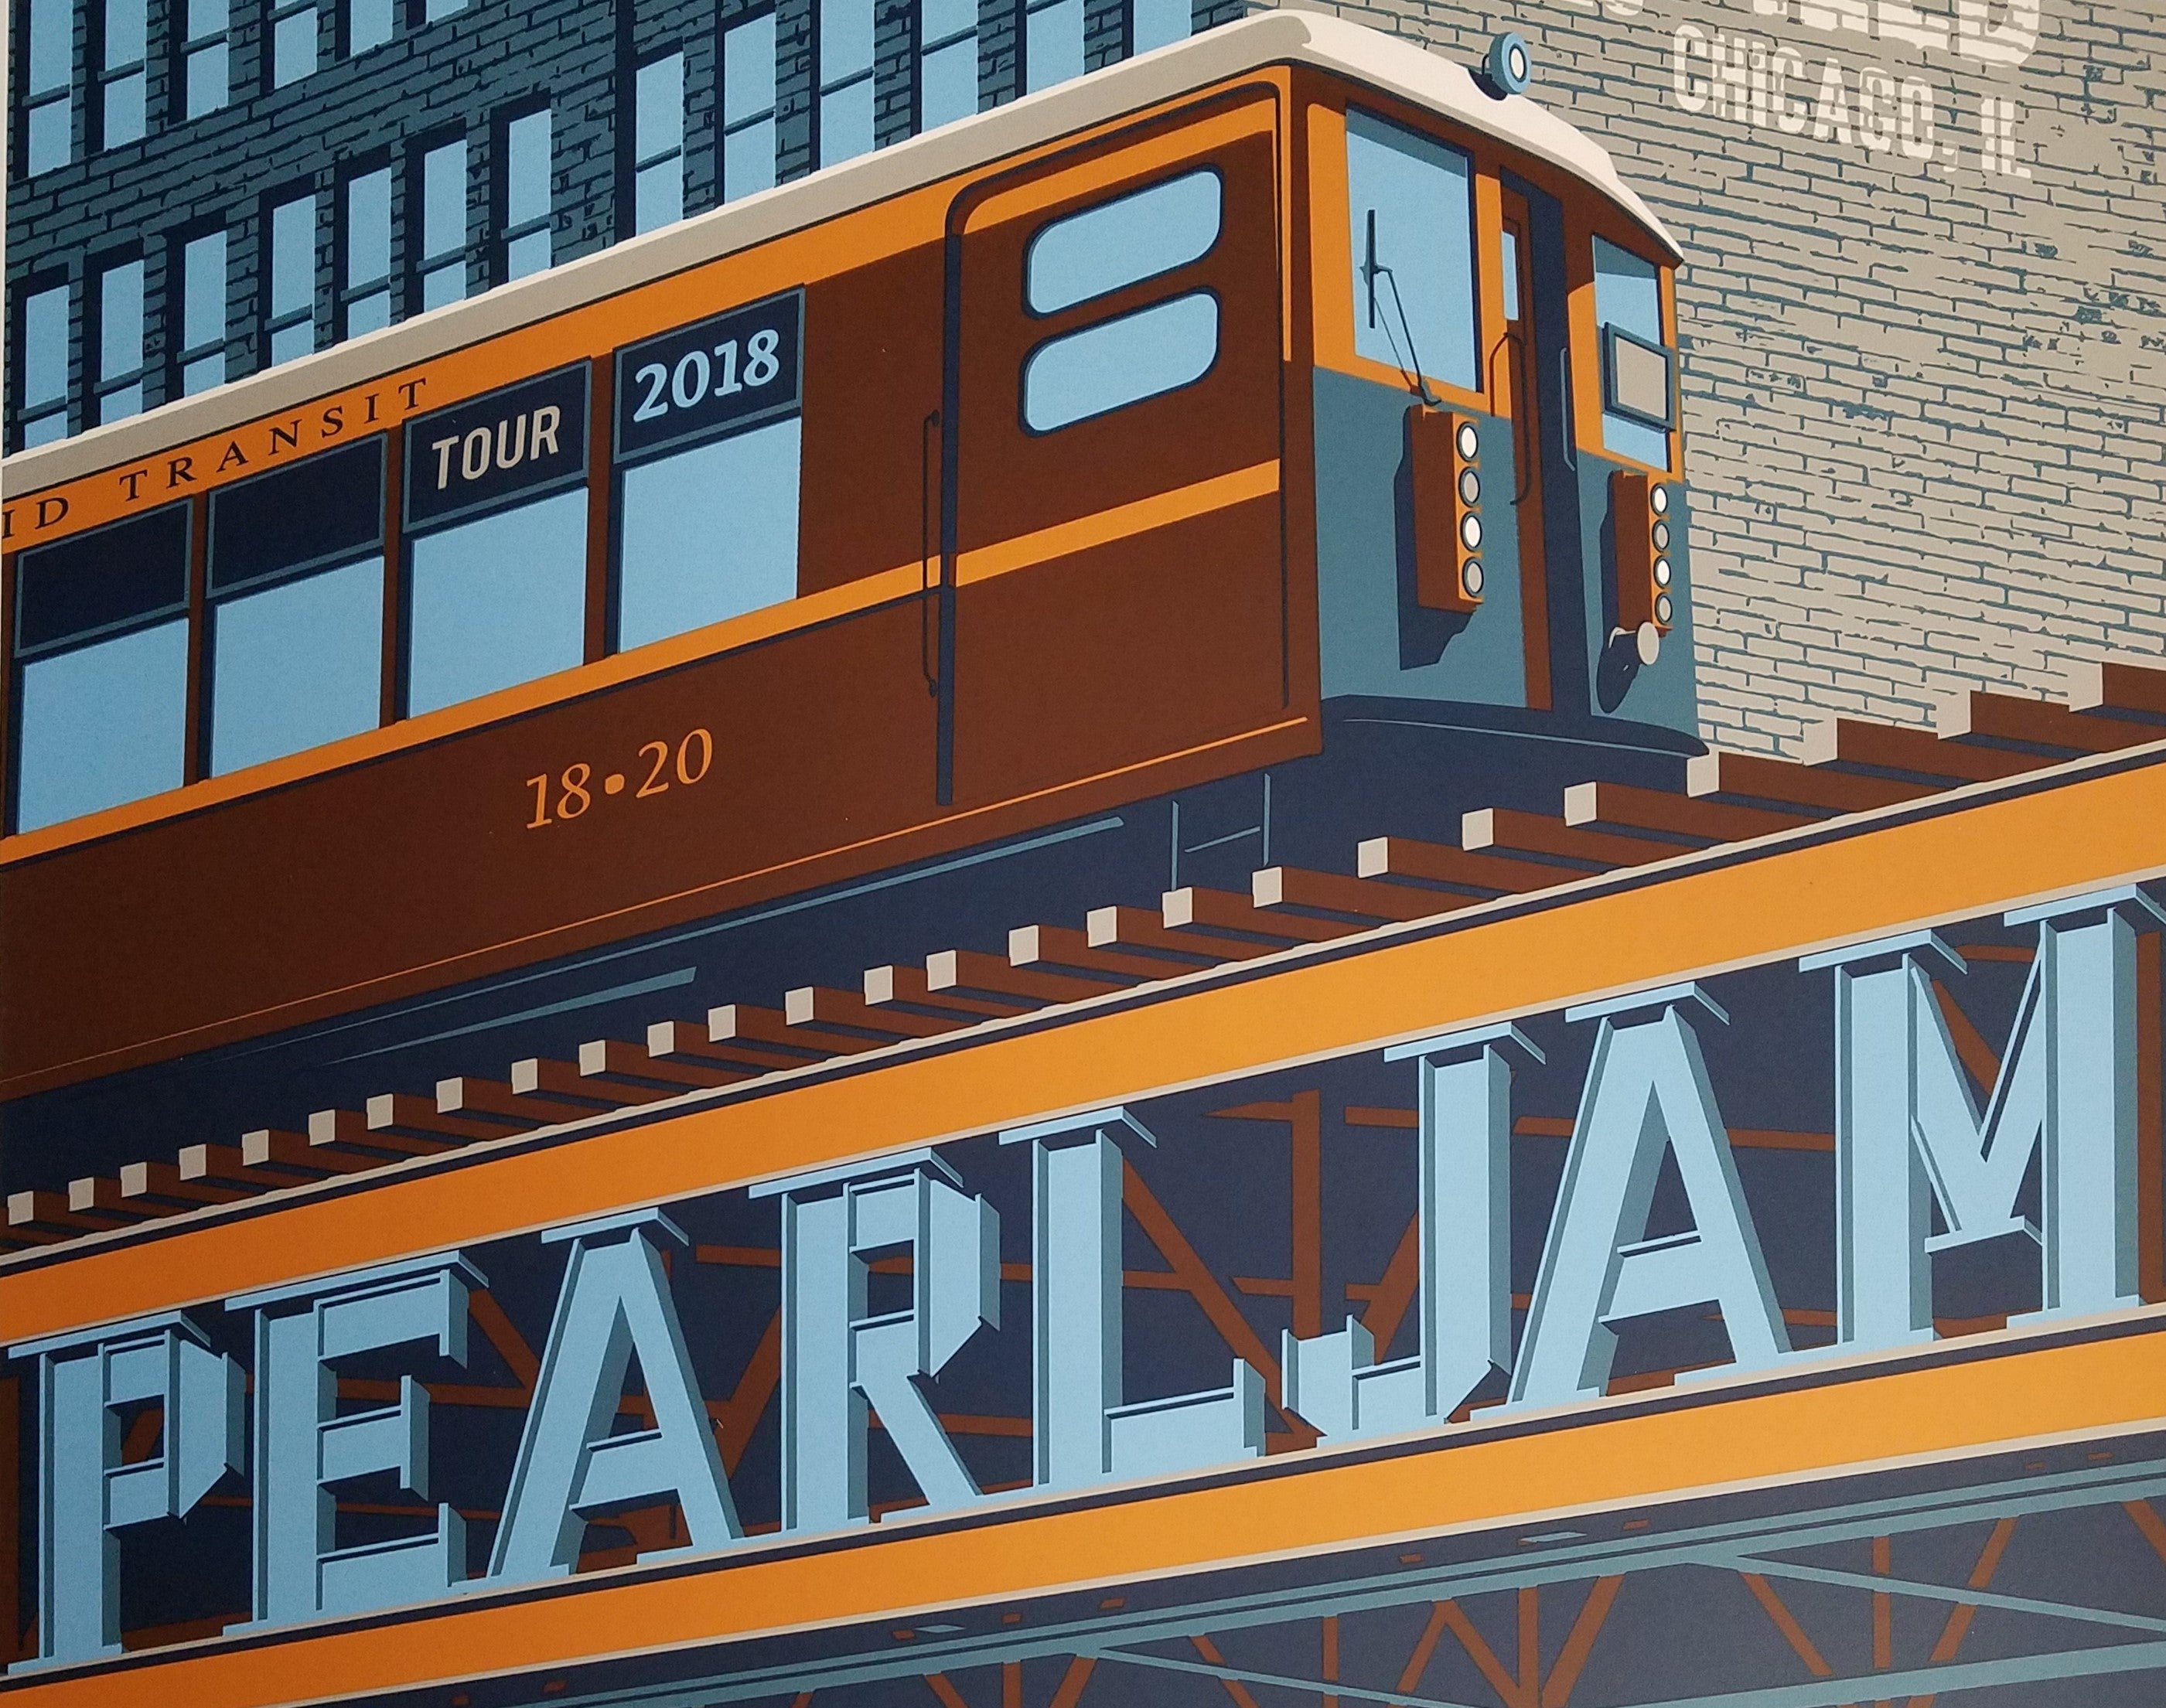 Title: Pearl Jam Wrigley Field (August 18th and 20th, 2018)  Artist: Steve Thomas  Edition: Official Merch Tent Poster, unsigned and unnumbered  Type: Screen print poster  Size: 18" x 24"  Location: Chicago, IL  Venue: Wrigley Field  Notes: Print is stored flat in very good condition. Released on August 16, 2018 at the Wrigley Field Merch Tent across the street from the field.